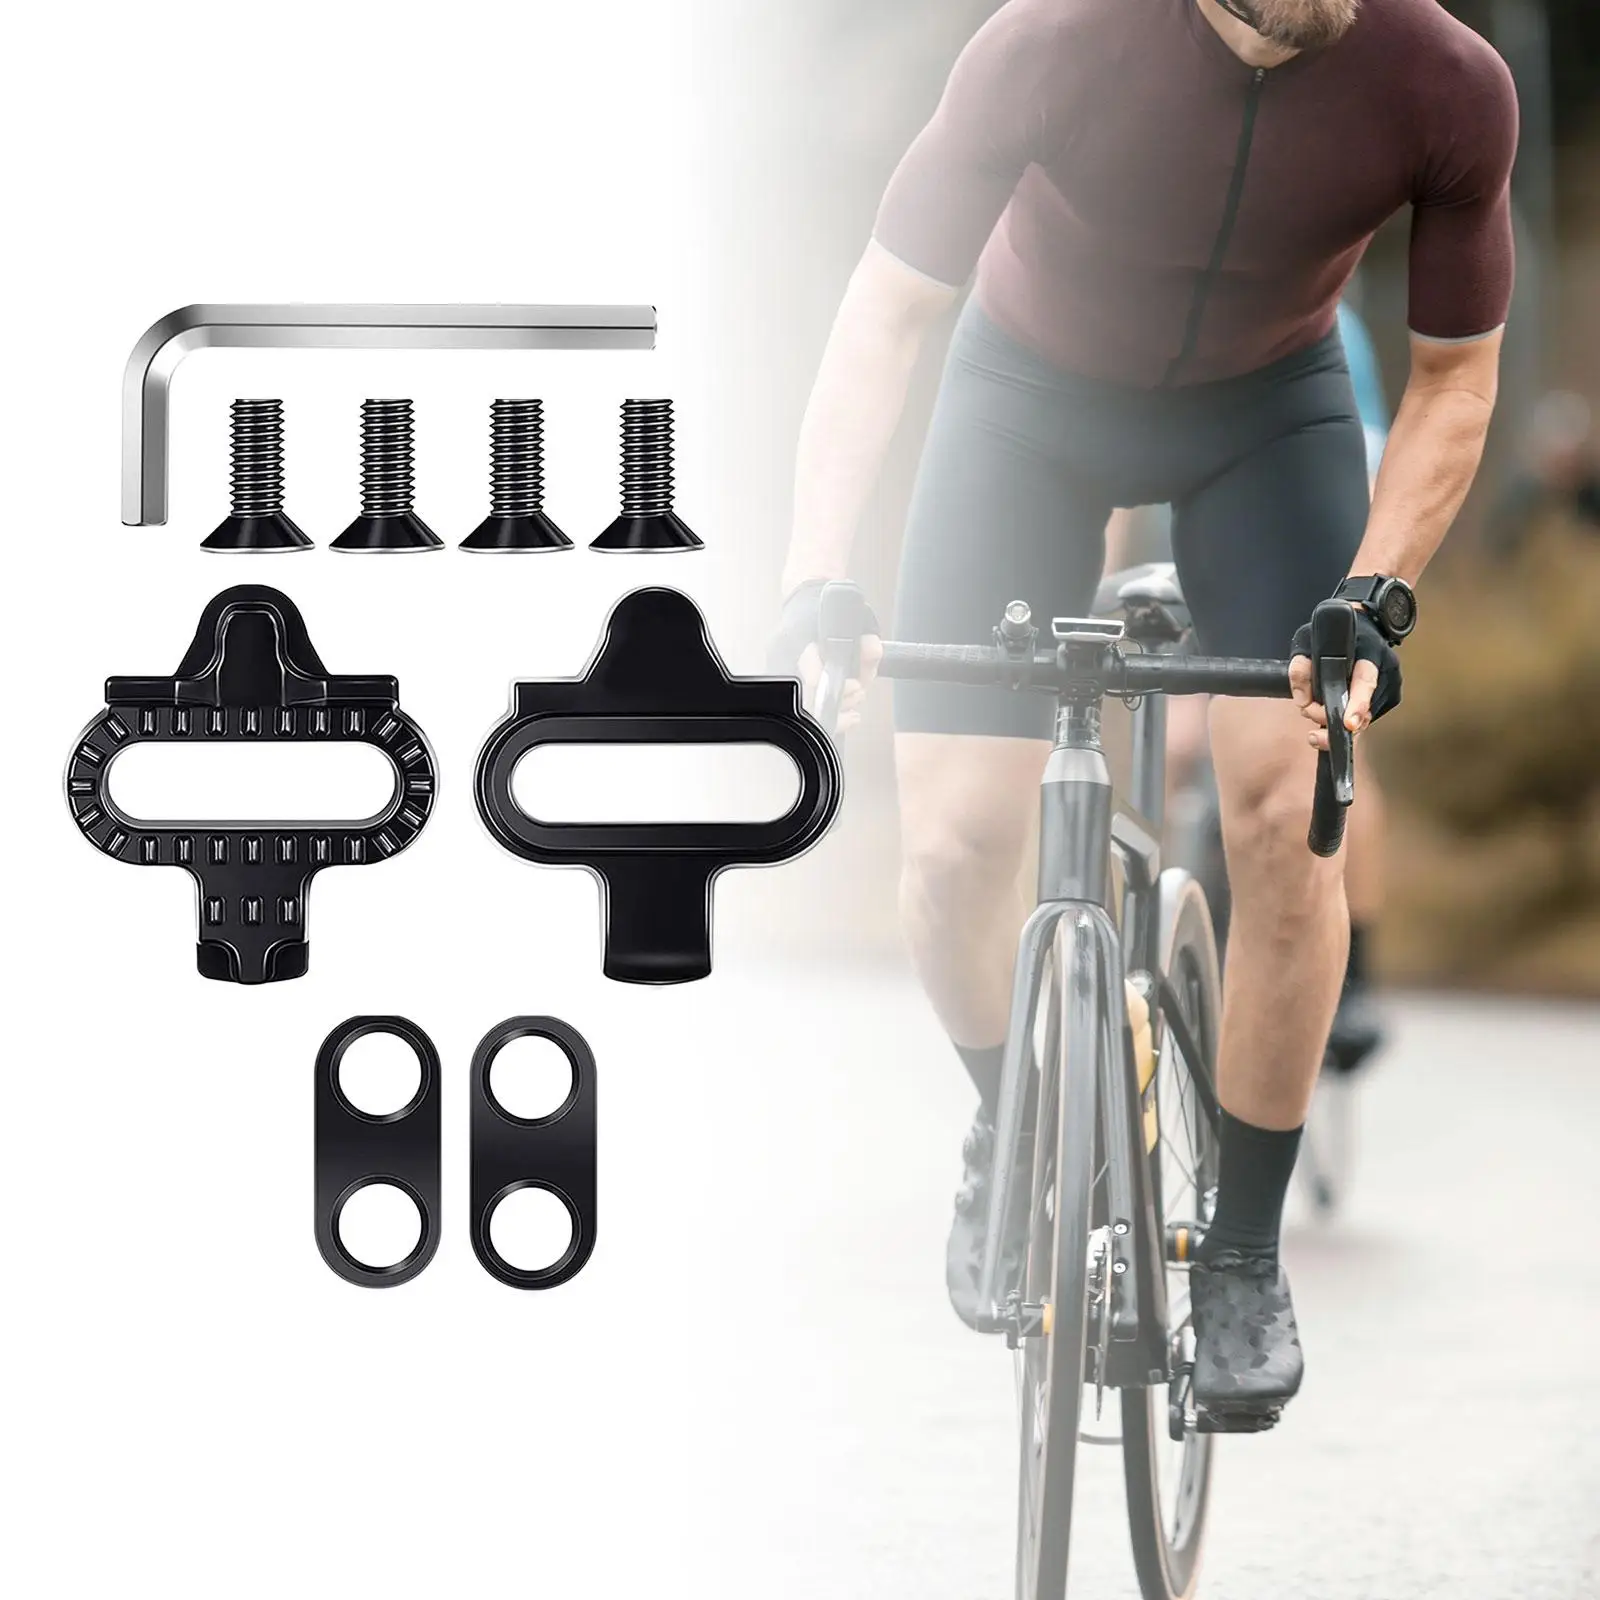 Pedal Lock Riding Shoes Splint Set Stable Protect Feet/ankles/Legs Easy Installation Cycling Components Cleats Pedal Locking Set